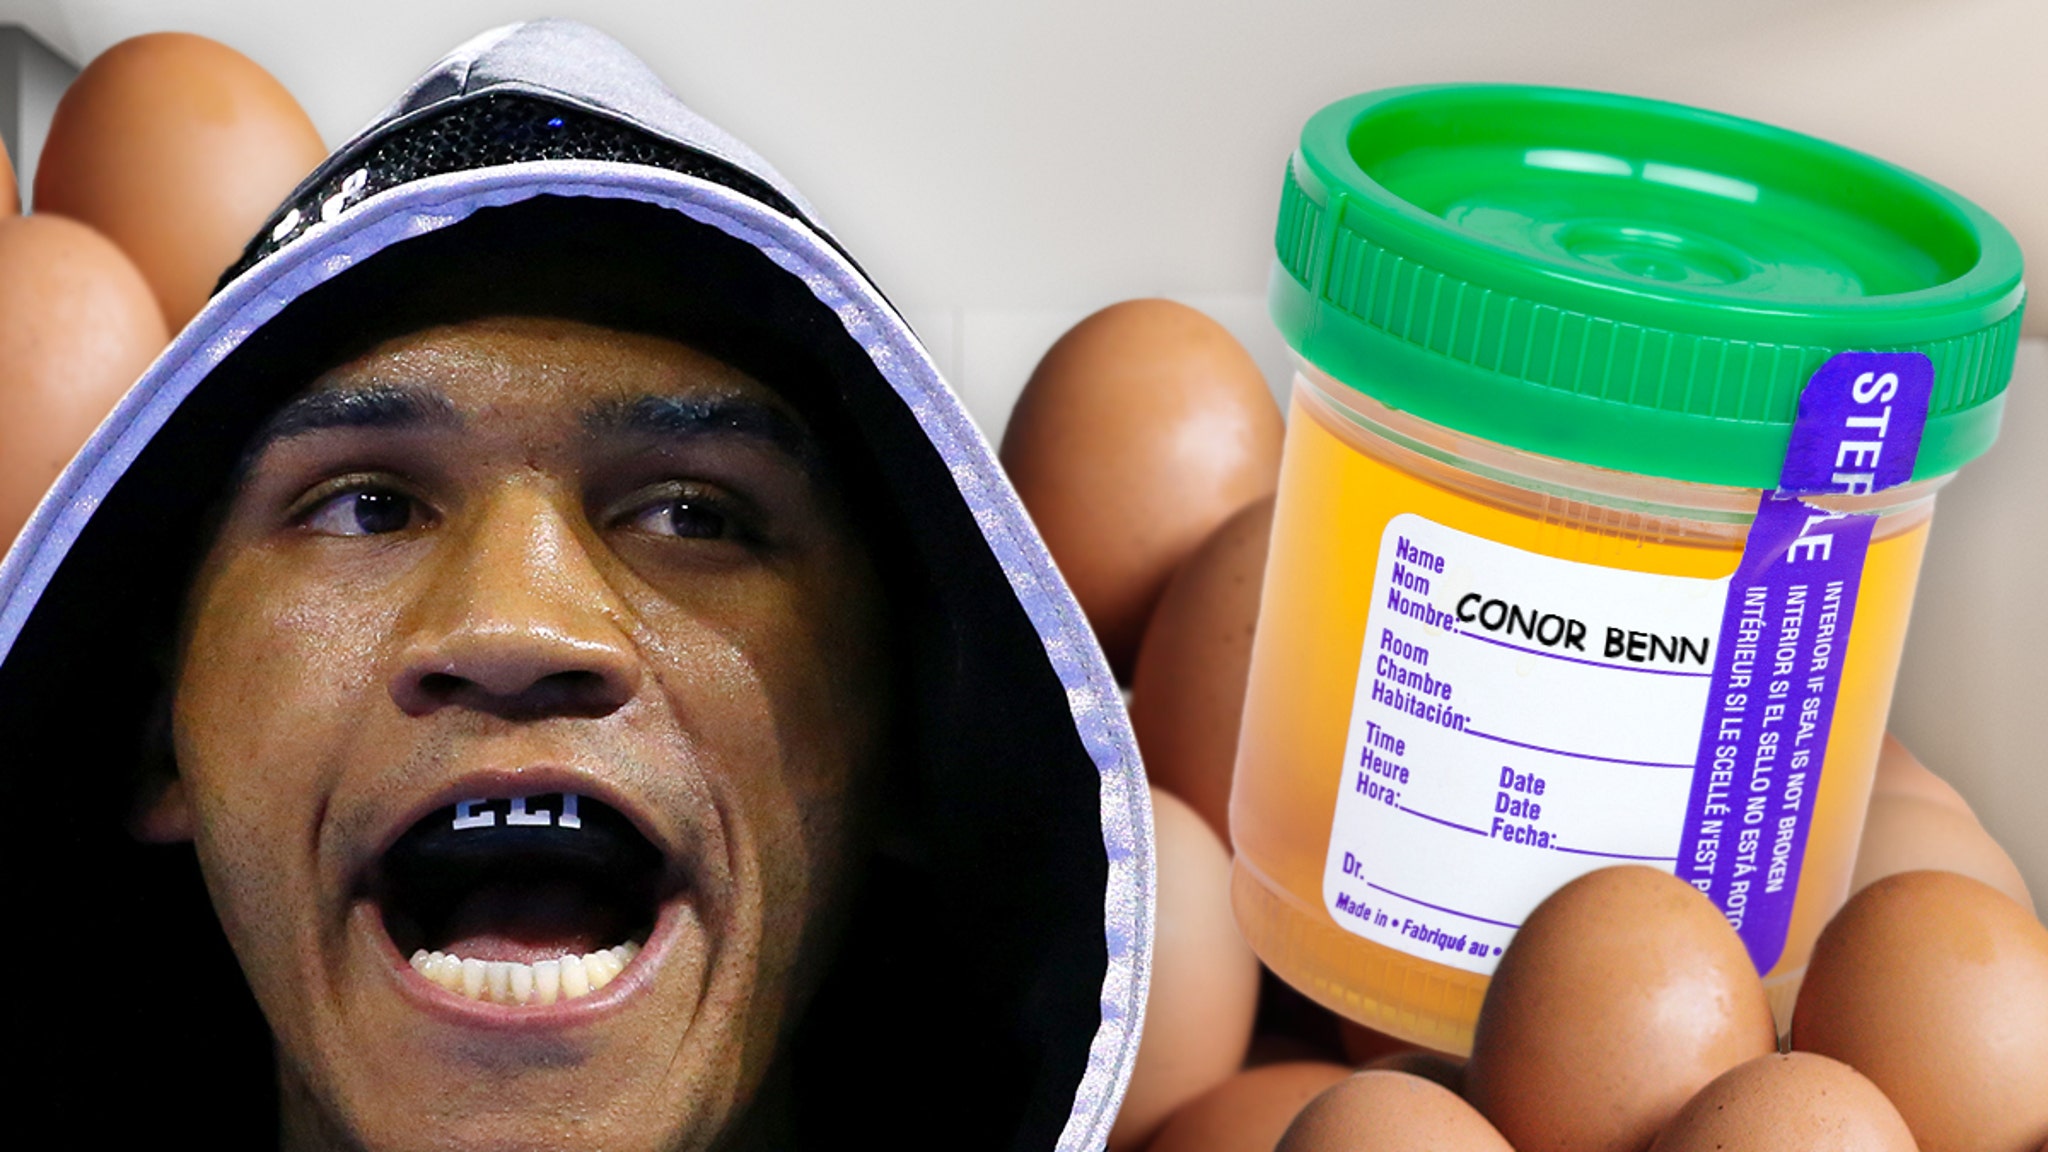 Boxing Star Conor Benn Cleared Of Doping, Overeating Eggs Caused Dirty Urine